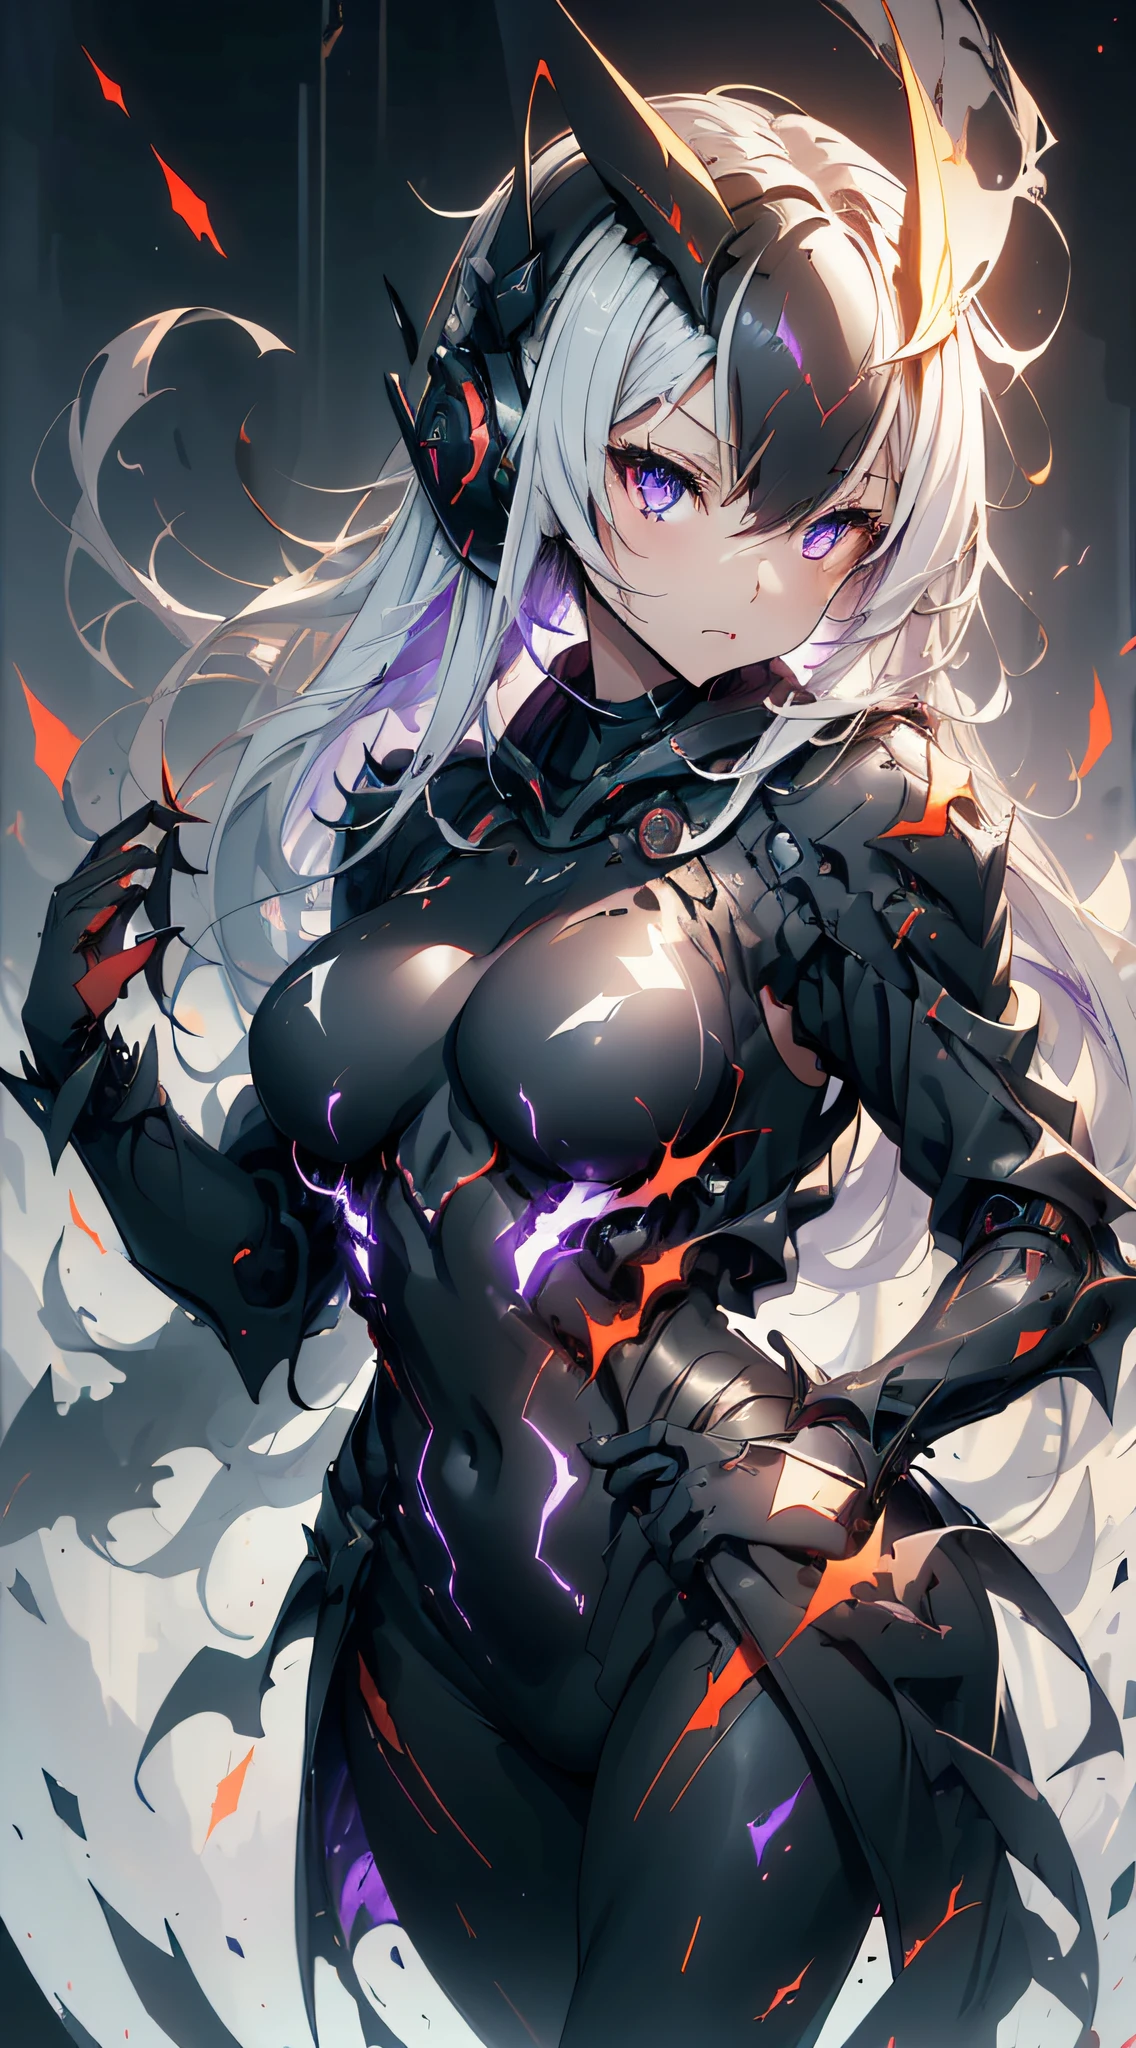 top-quality、Top image quality、​masterpiece、girl with((White suit、glowing mechanic suit、18year old、teen ager、cute little、Best Bust、big bast,Beautiful shining purple eyes、Breasts wide open, a blond、Longhaire、A slender,Large valleys、belligerent movements,sharp claws、With sniper rifle、head phone、black bright wings、fighting poses、being filmed、splatters、Feeling of sprinting)),hiquality、Beautiful Art、Background with((Space Battlefield)))、Depth(planet earth）,masutepiece、depth of fields,Cinematic style